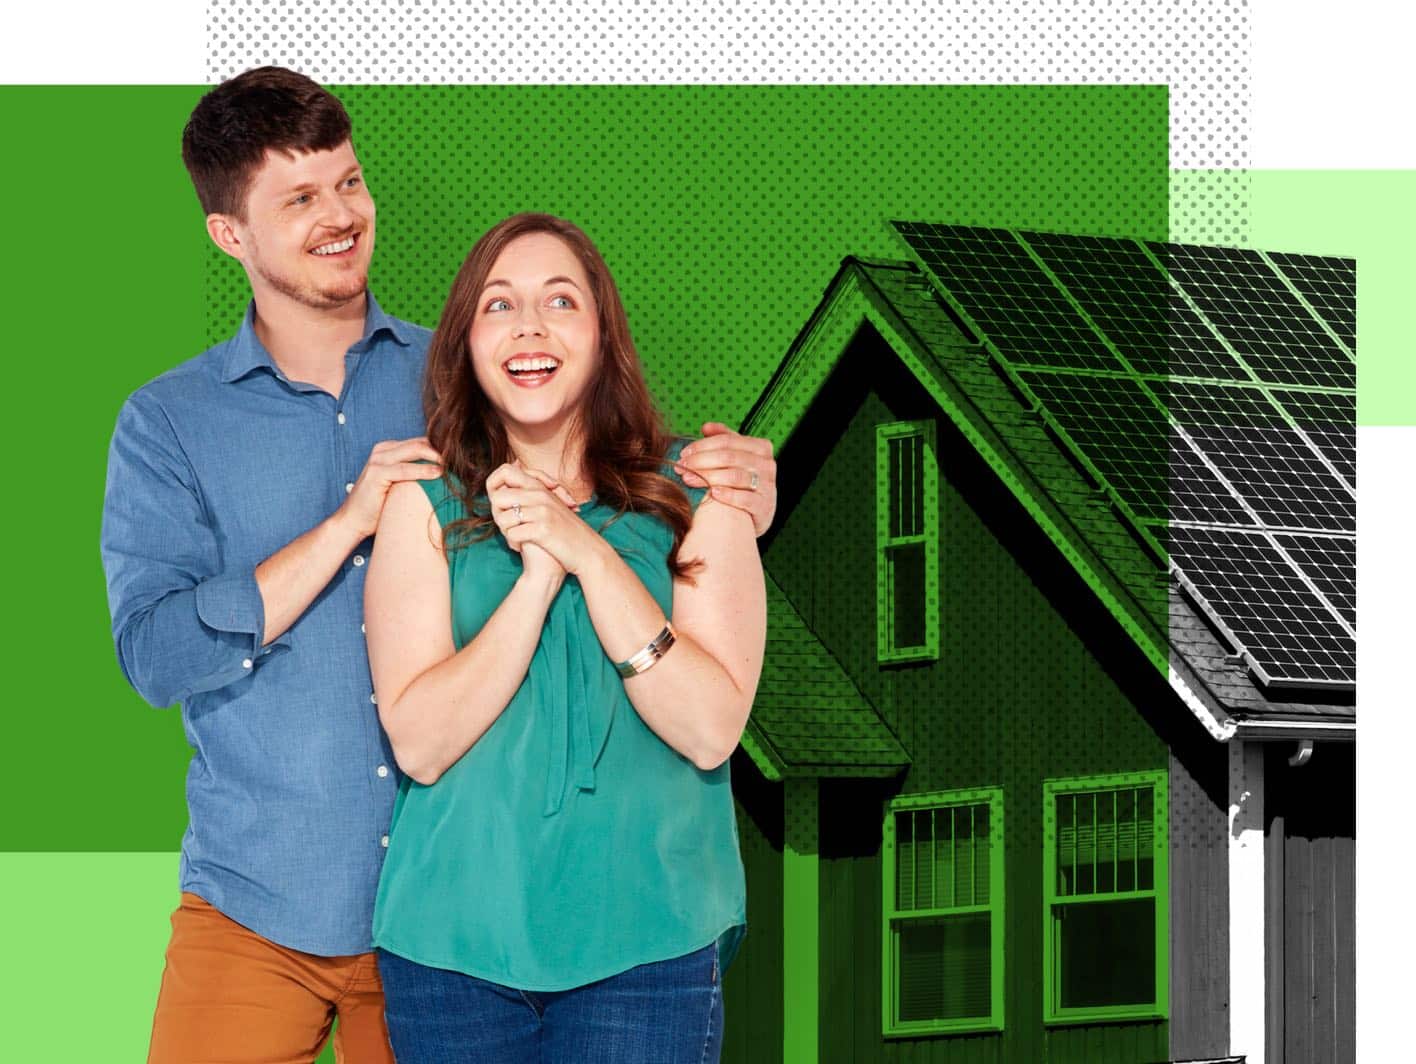 Megan & Andrew, Affinity Plus members, in front of a house with solar panels.